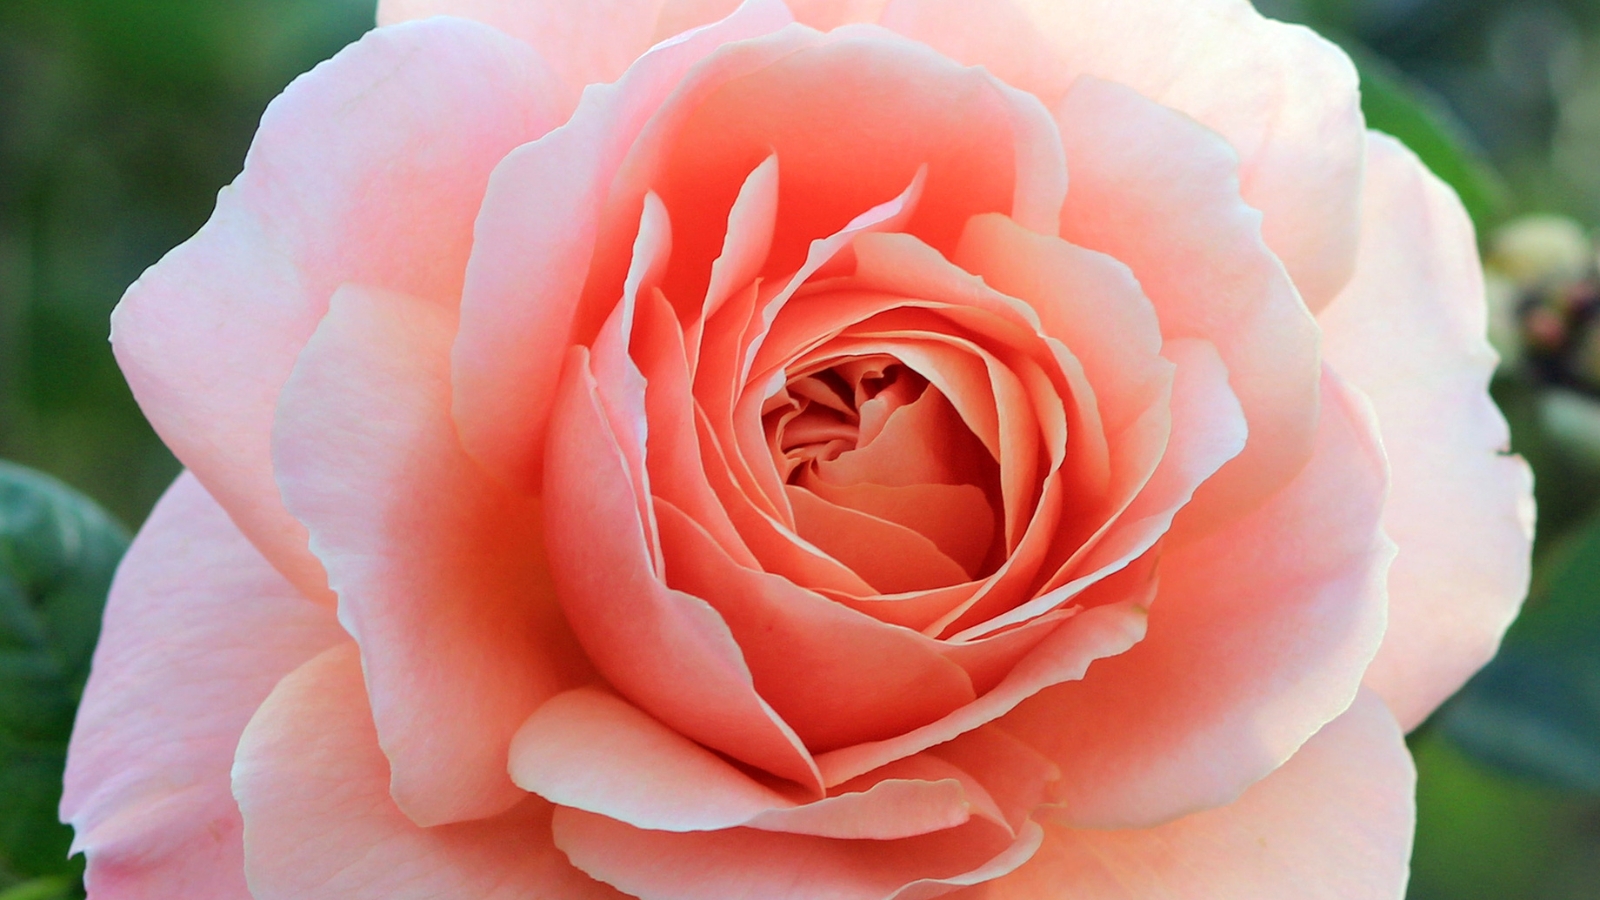 A close-up reveals the intricate beauty of a 'State of Grace' rose, showcasing its soft, delicate pink petals, gracefully unfurling in a mesmerizing display of natural elegance.